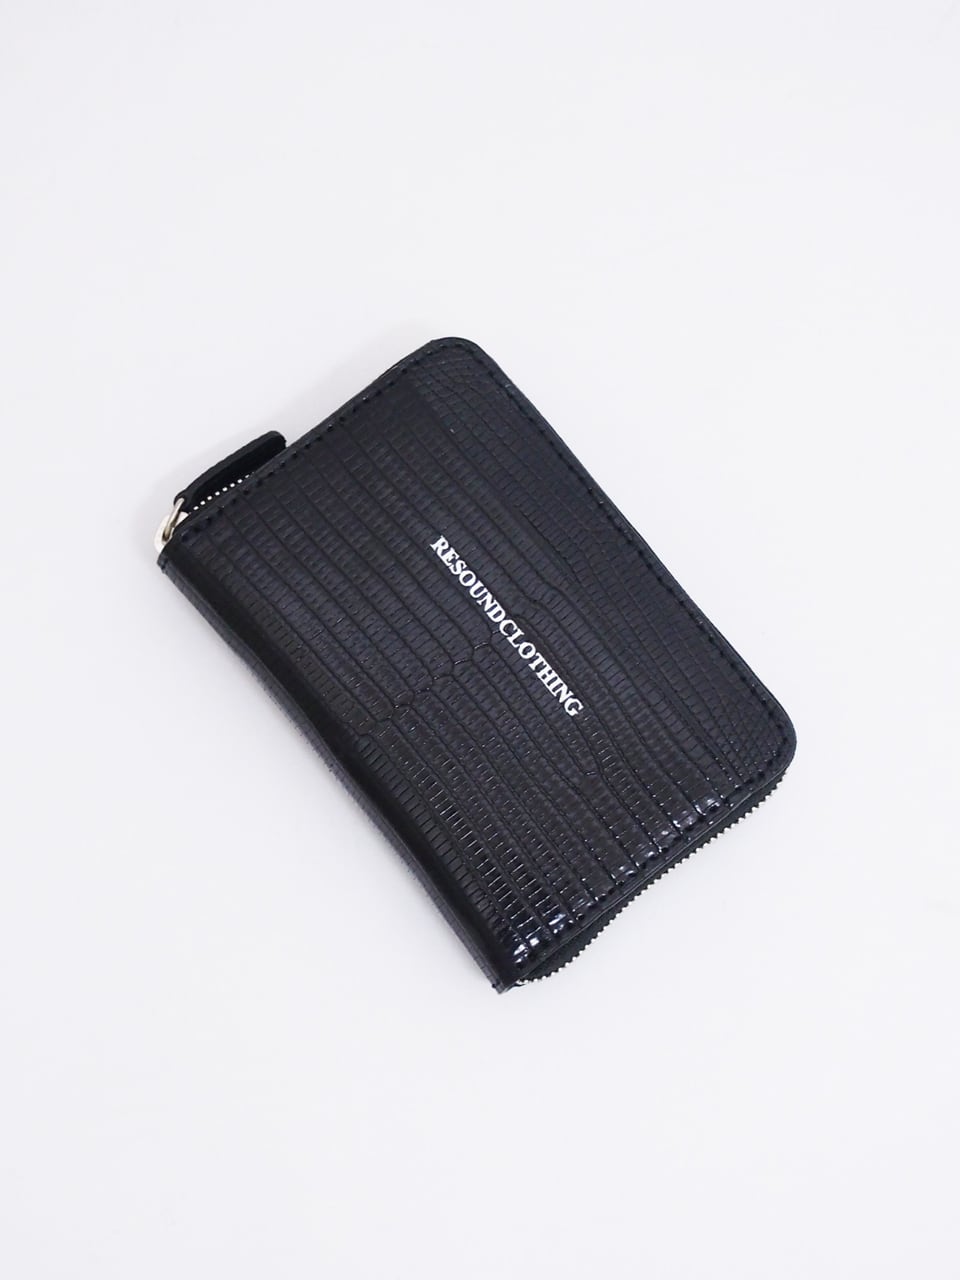 RESOUND CLOTHING (リサウンドクロージング) LIZARD MINI WALLET / BLACK　RC14-A-004-1